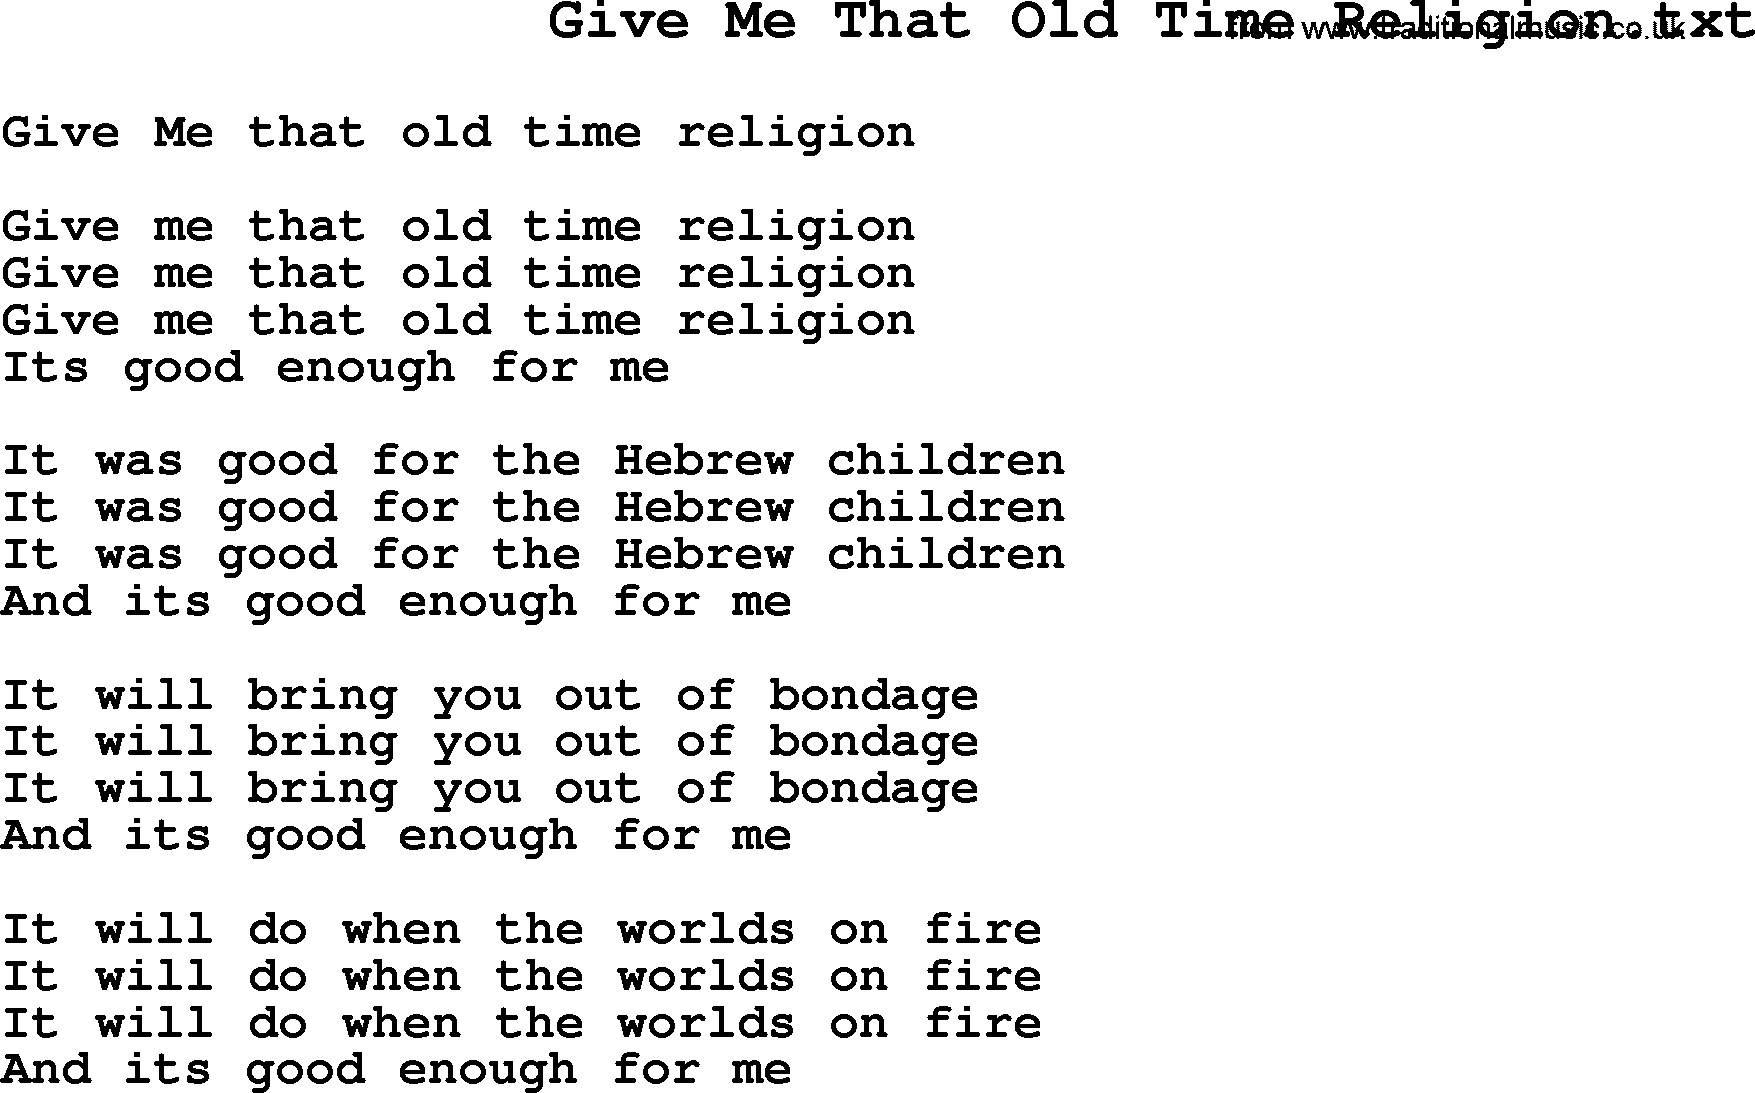 Negro Spiritual Song Lyrics for Give Me That Old Time Religion